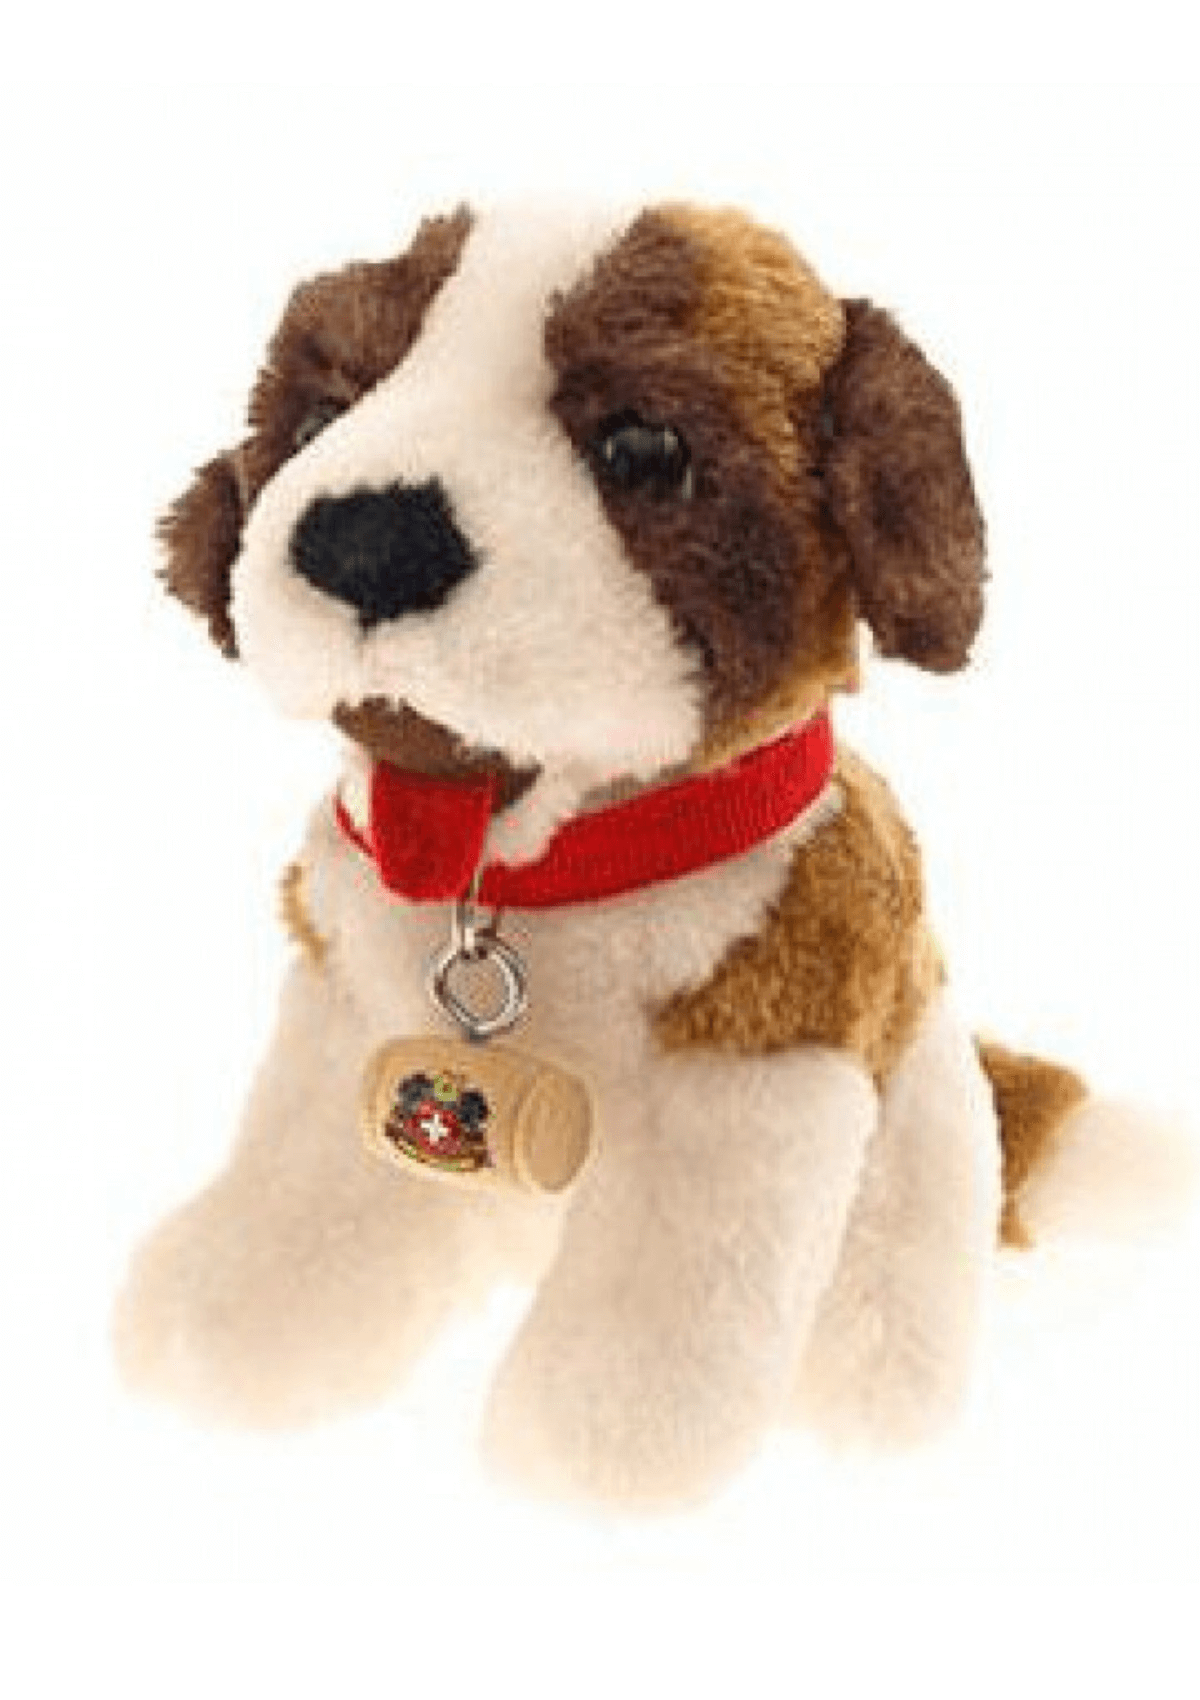 St Bernard dog souvenirs are good gifts from Switzerland for kids